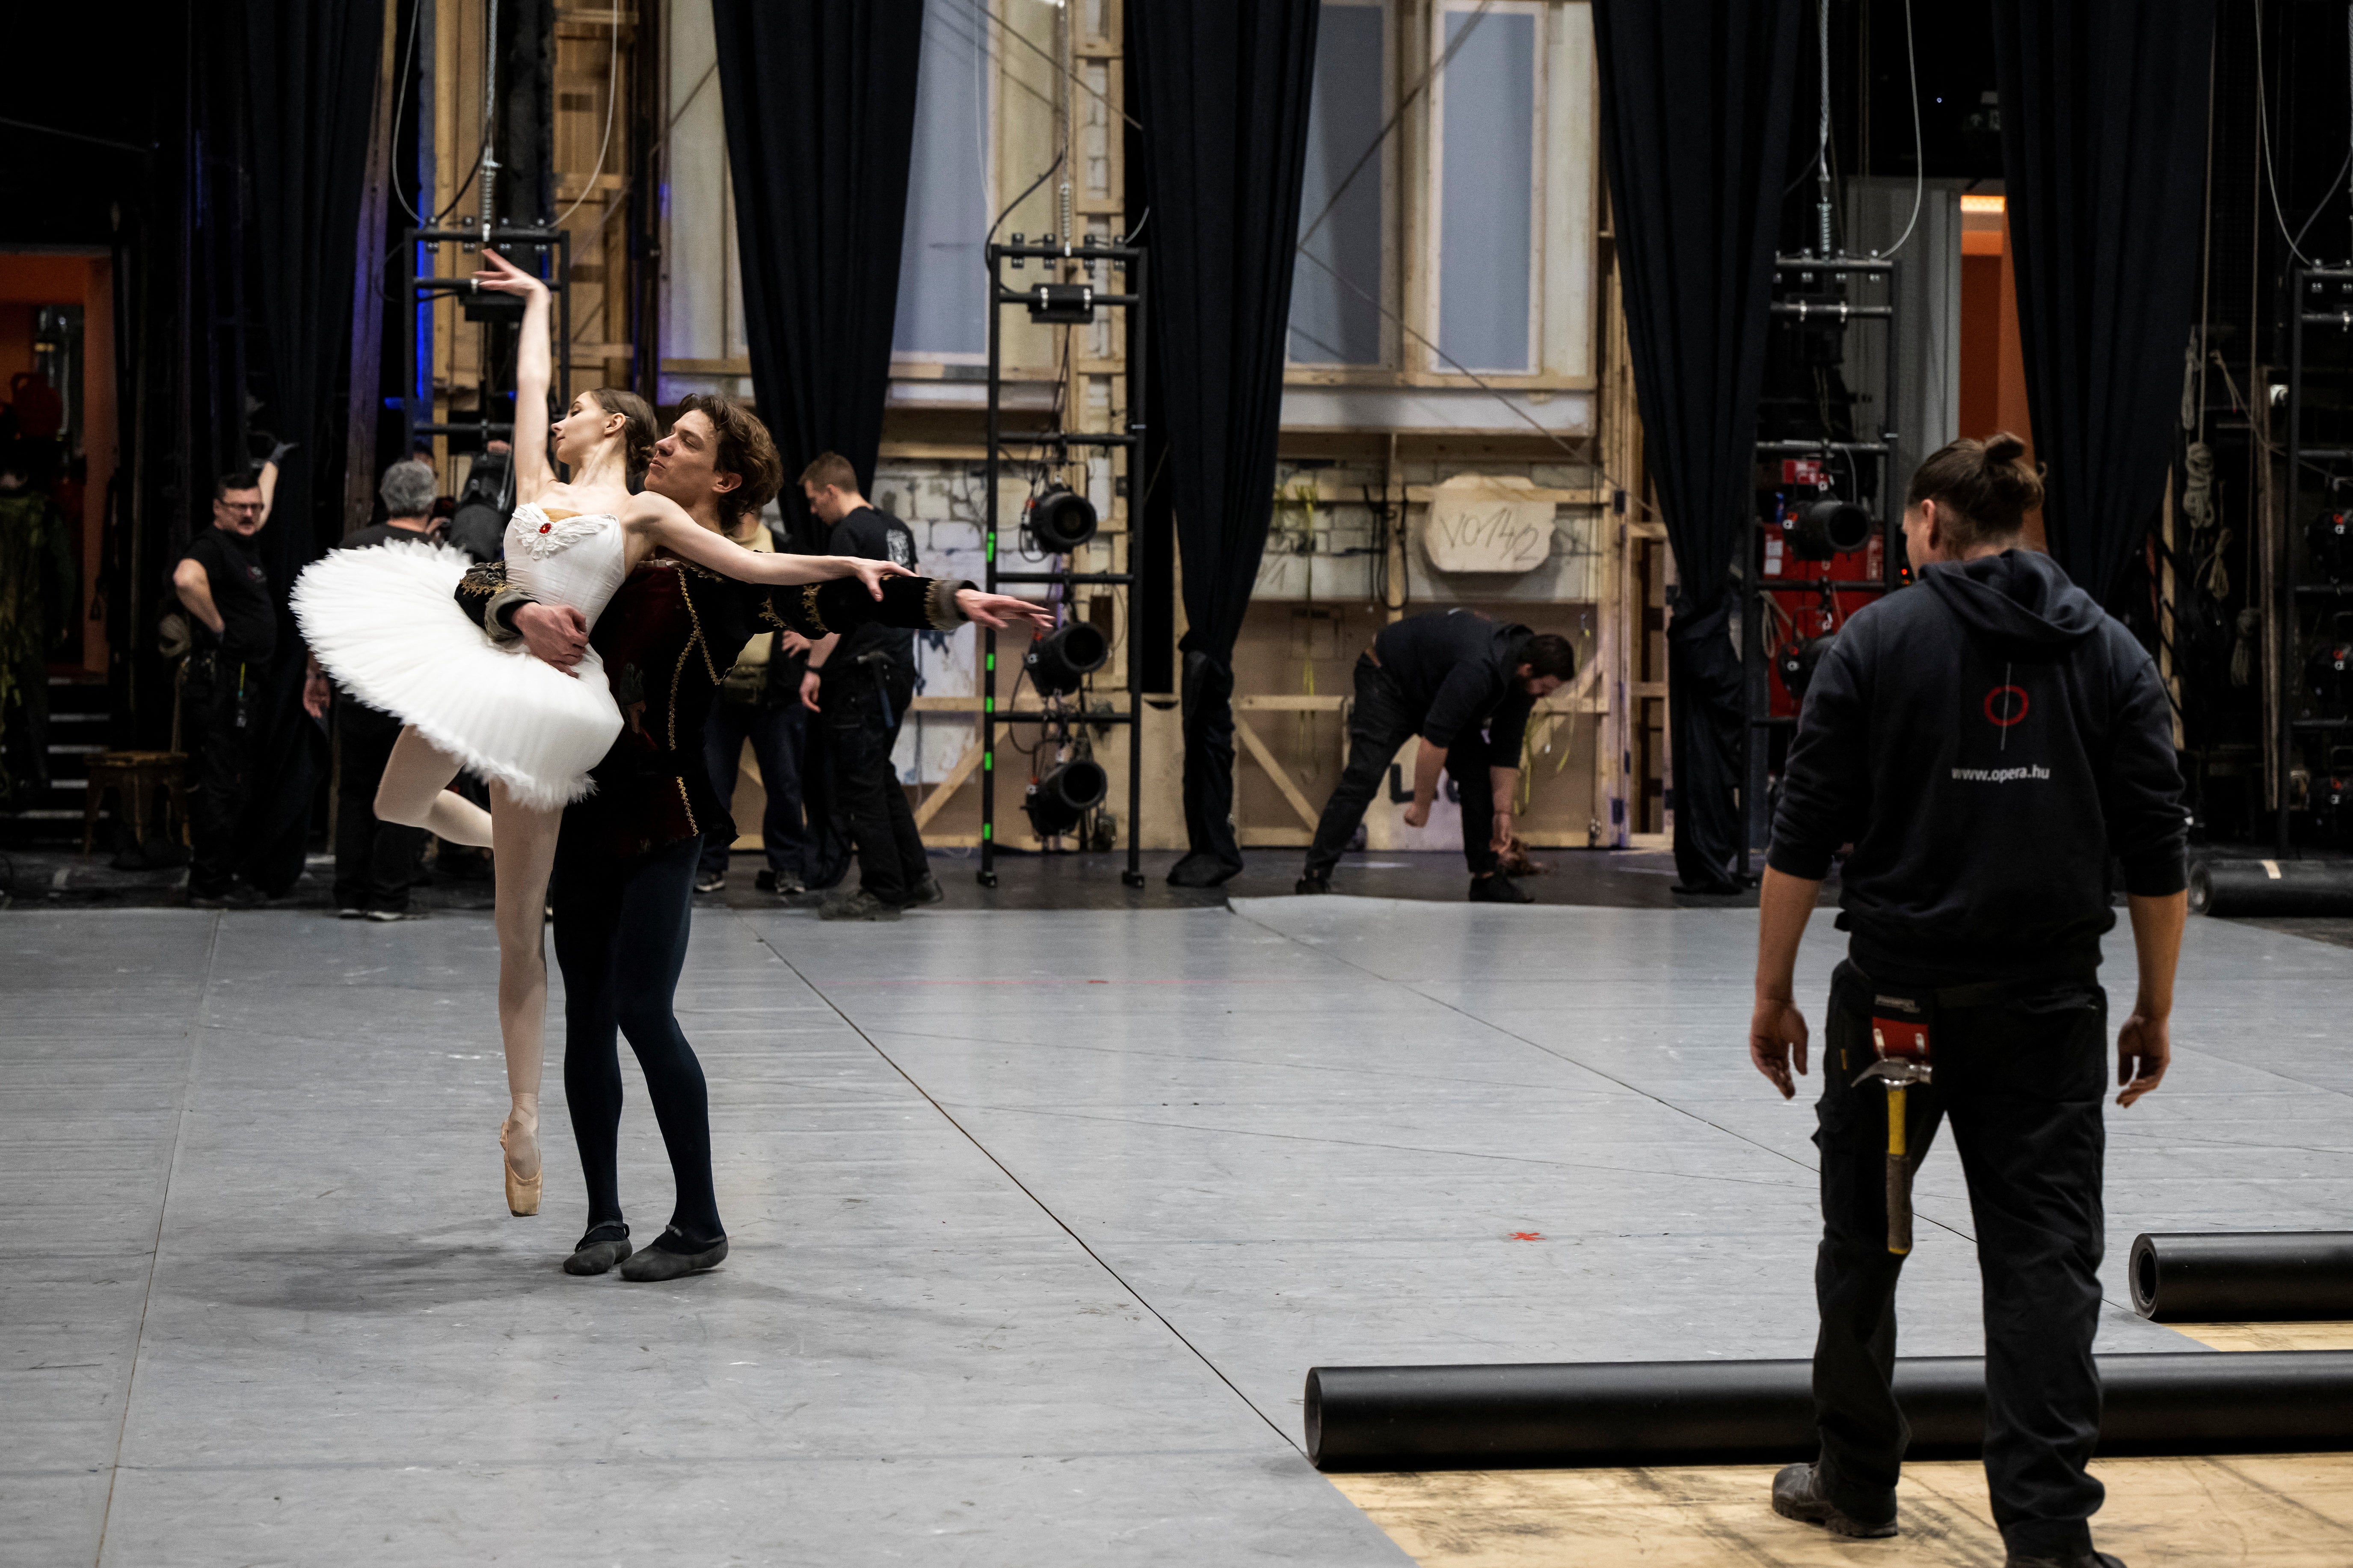 Muromtseva is now back at the top in the role of Odette and Odile